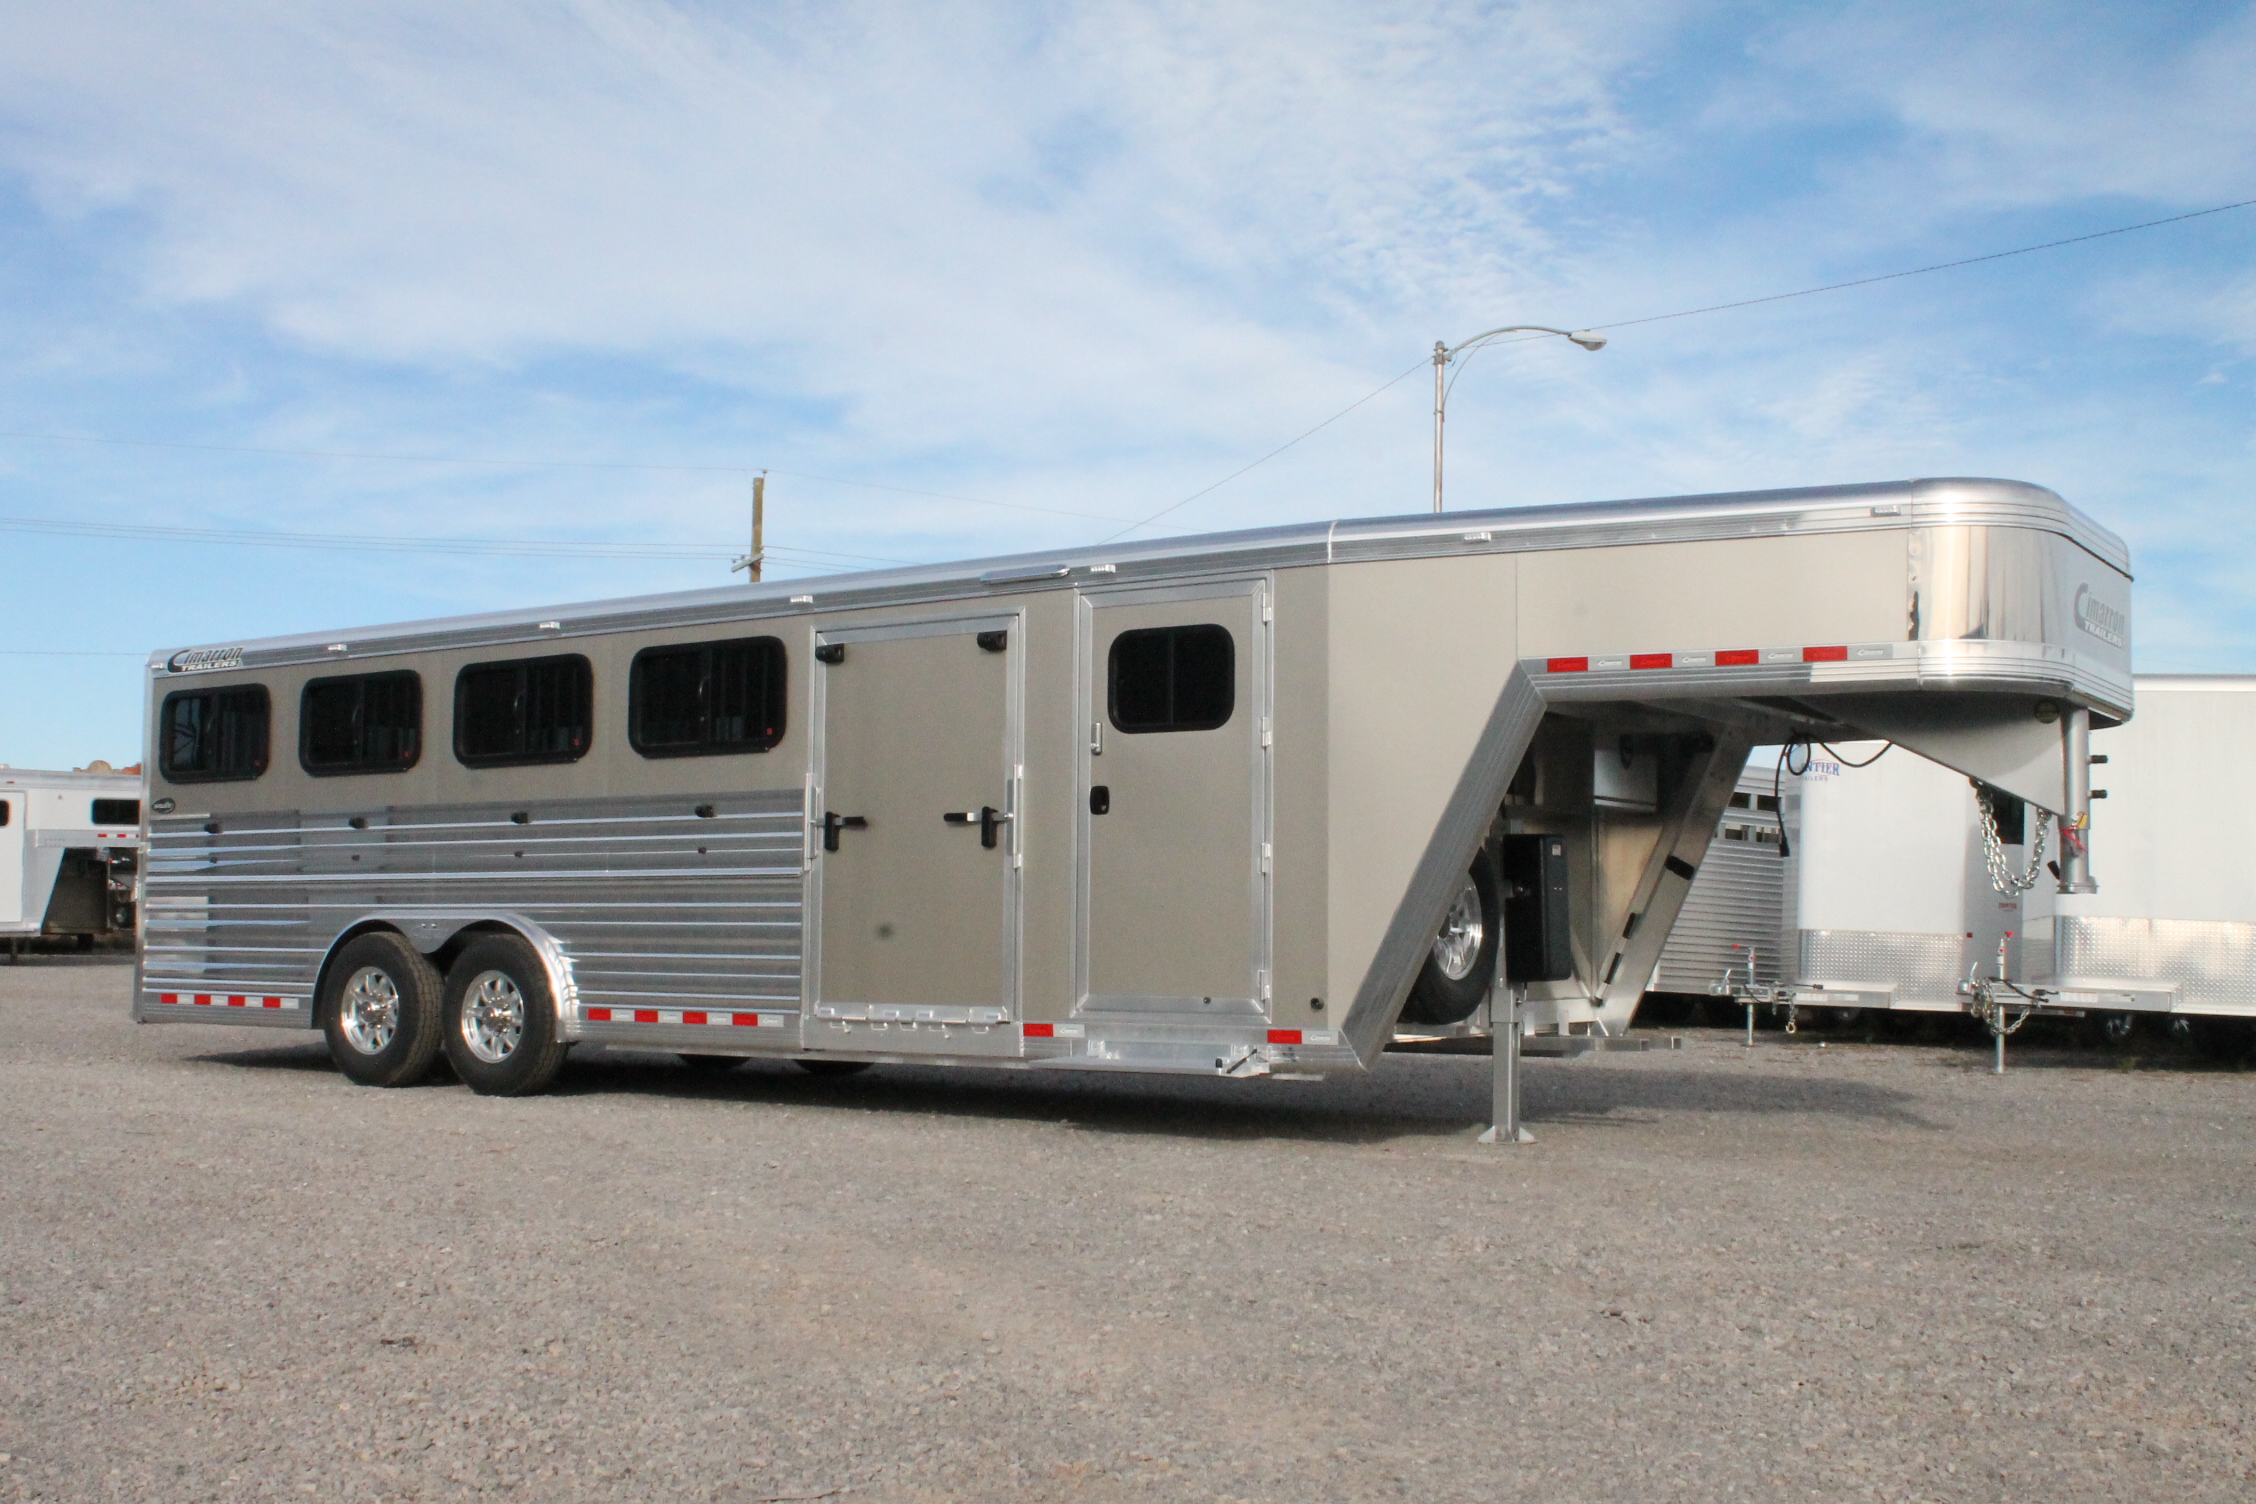 A Cimarron trailer that's parked in a gravel lot with other trailers